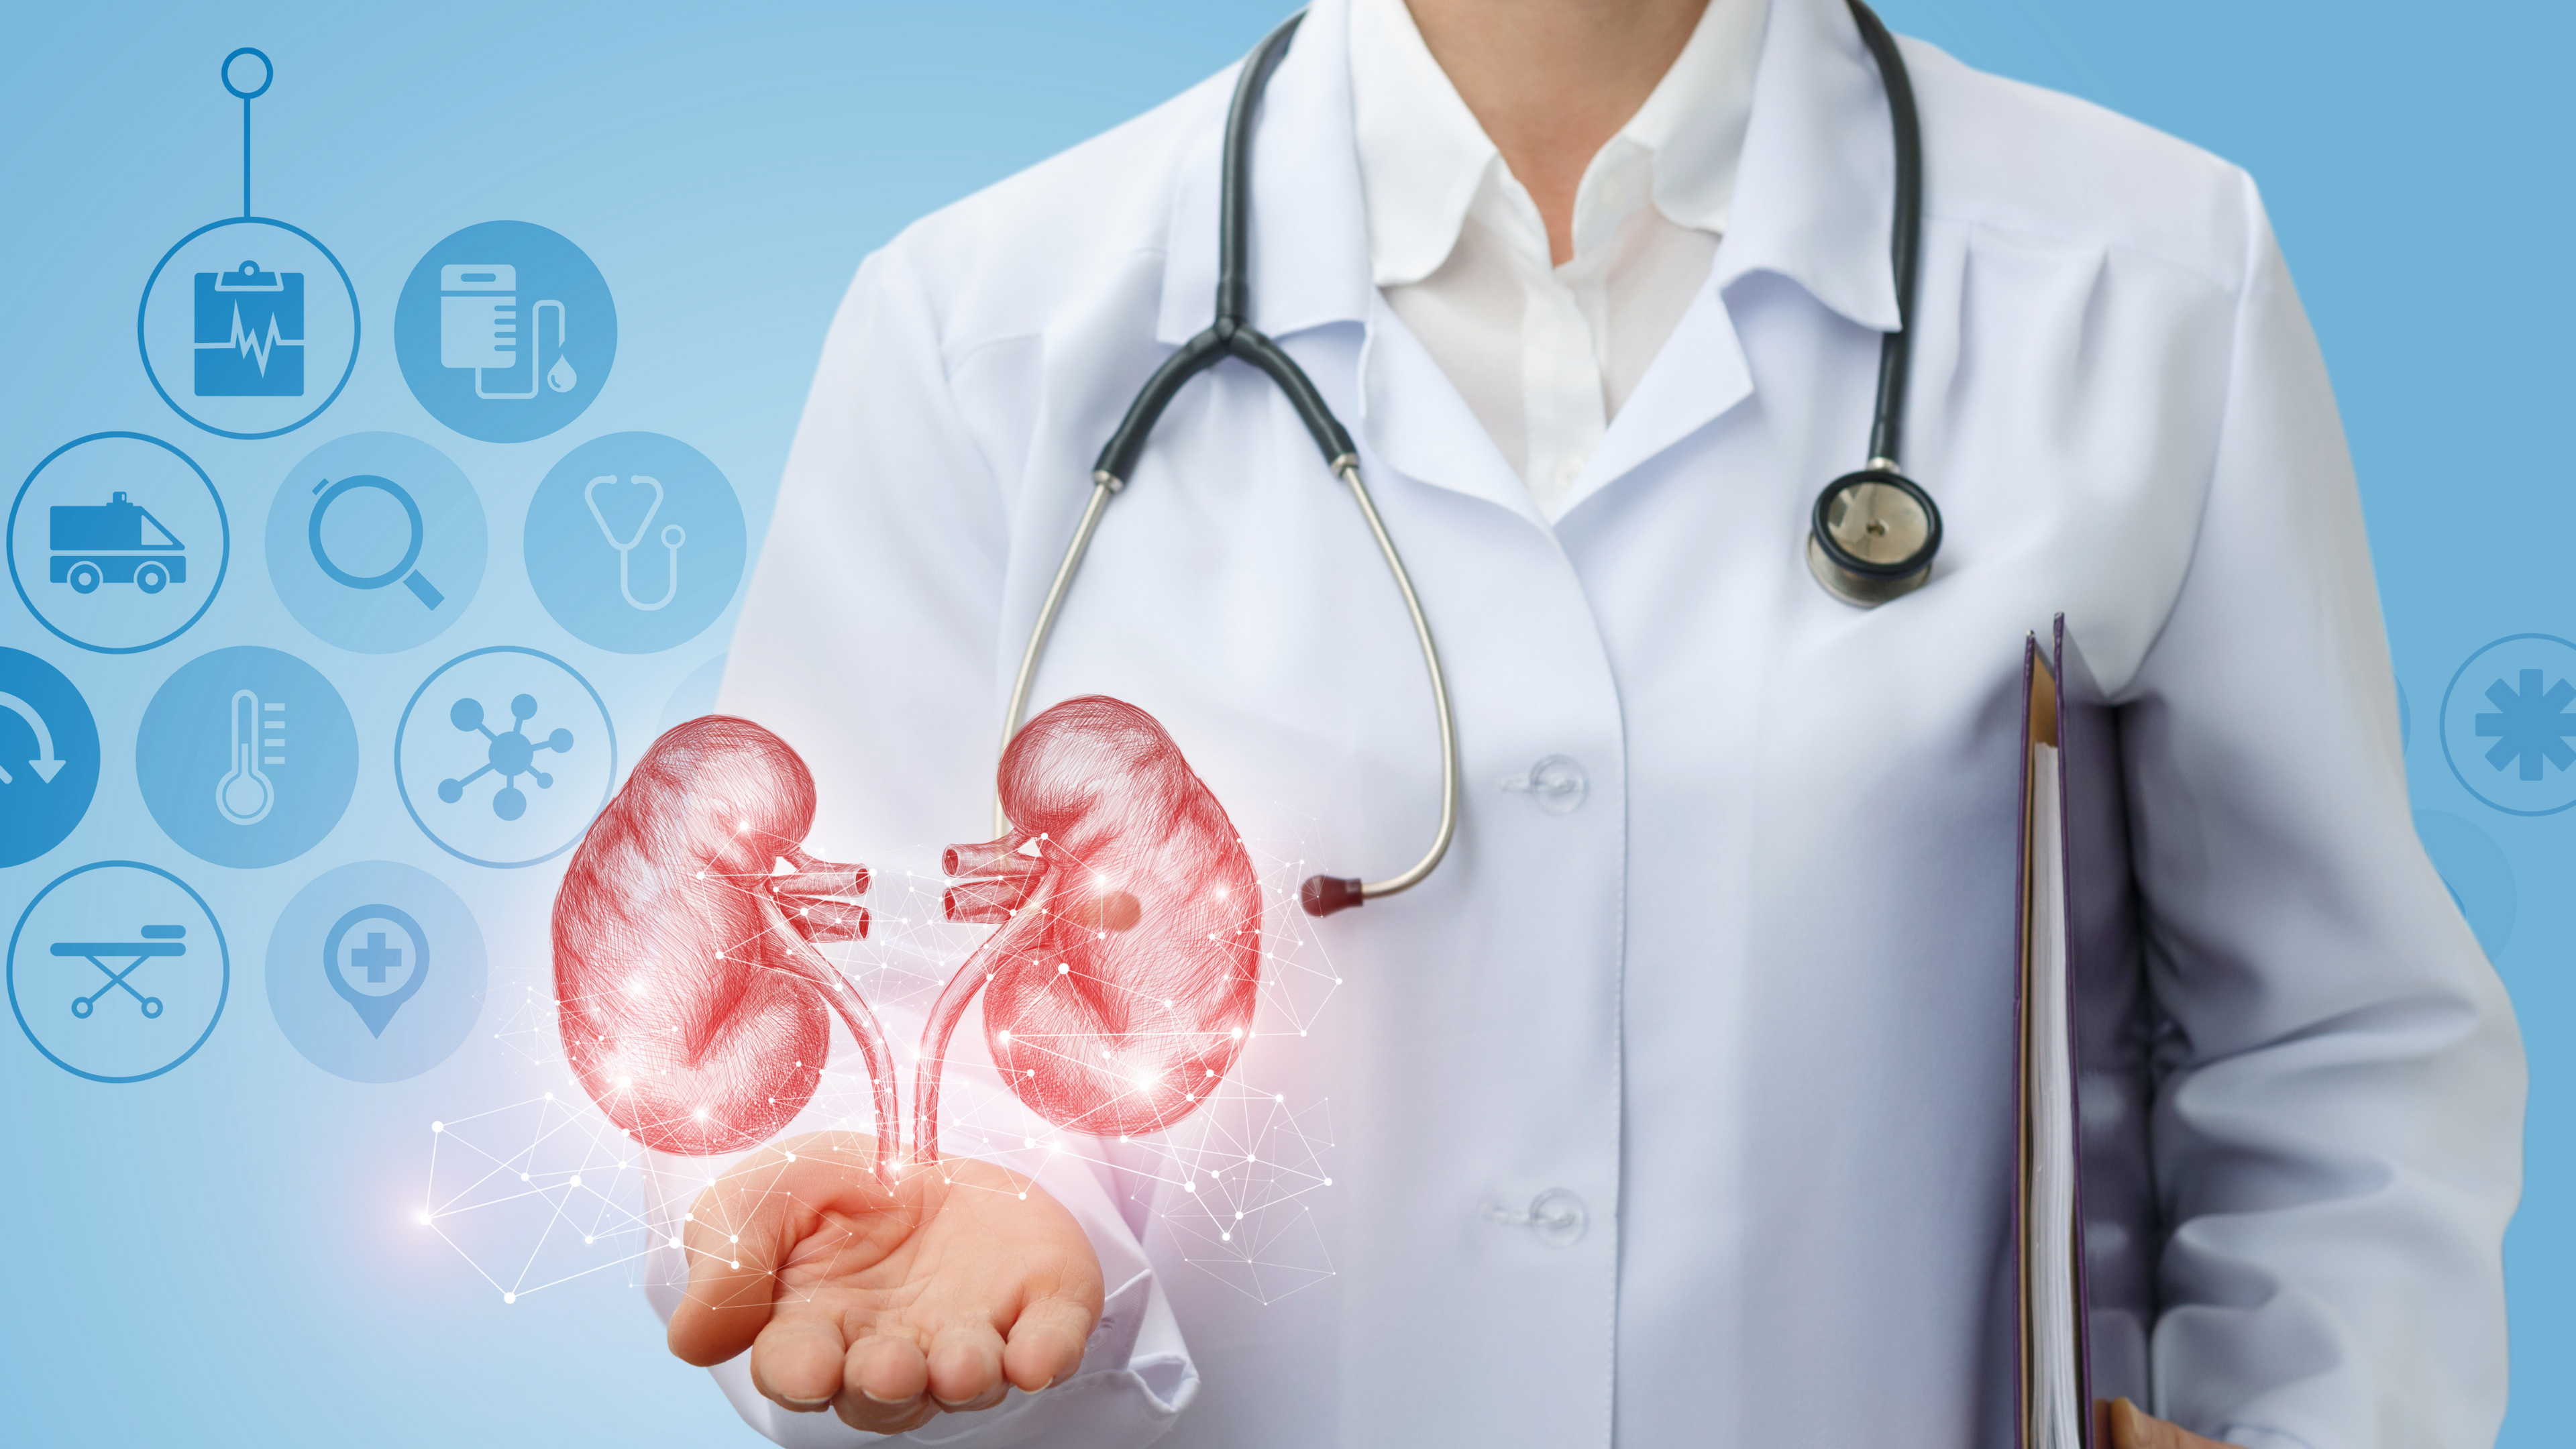 Tips for Kidney Health in Honor of National Kidney Month